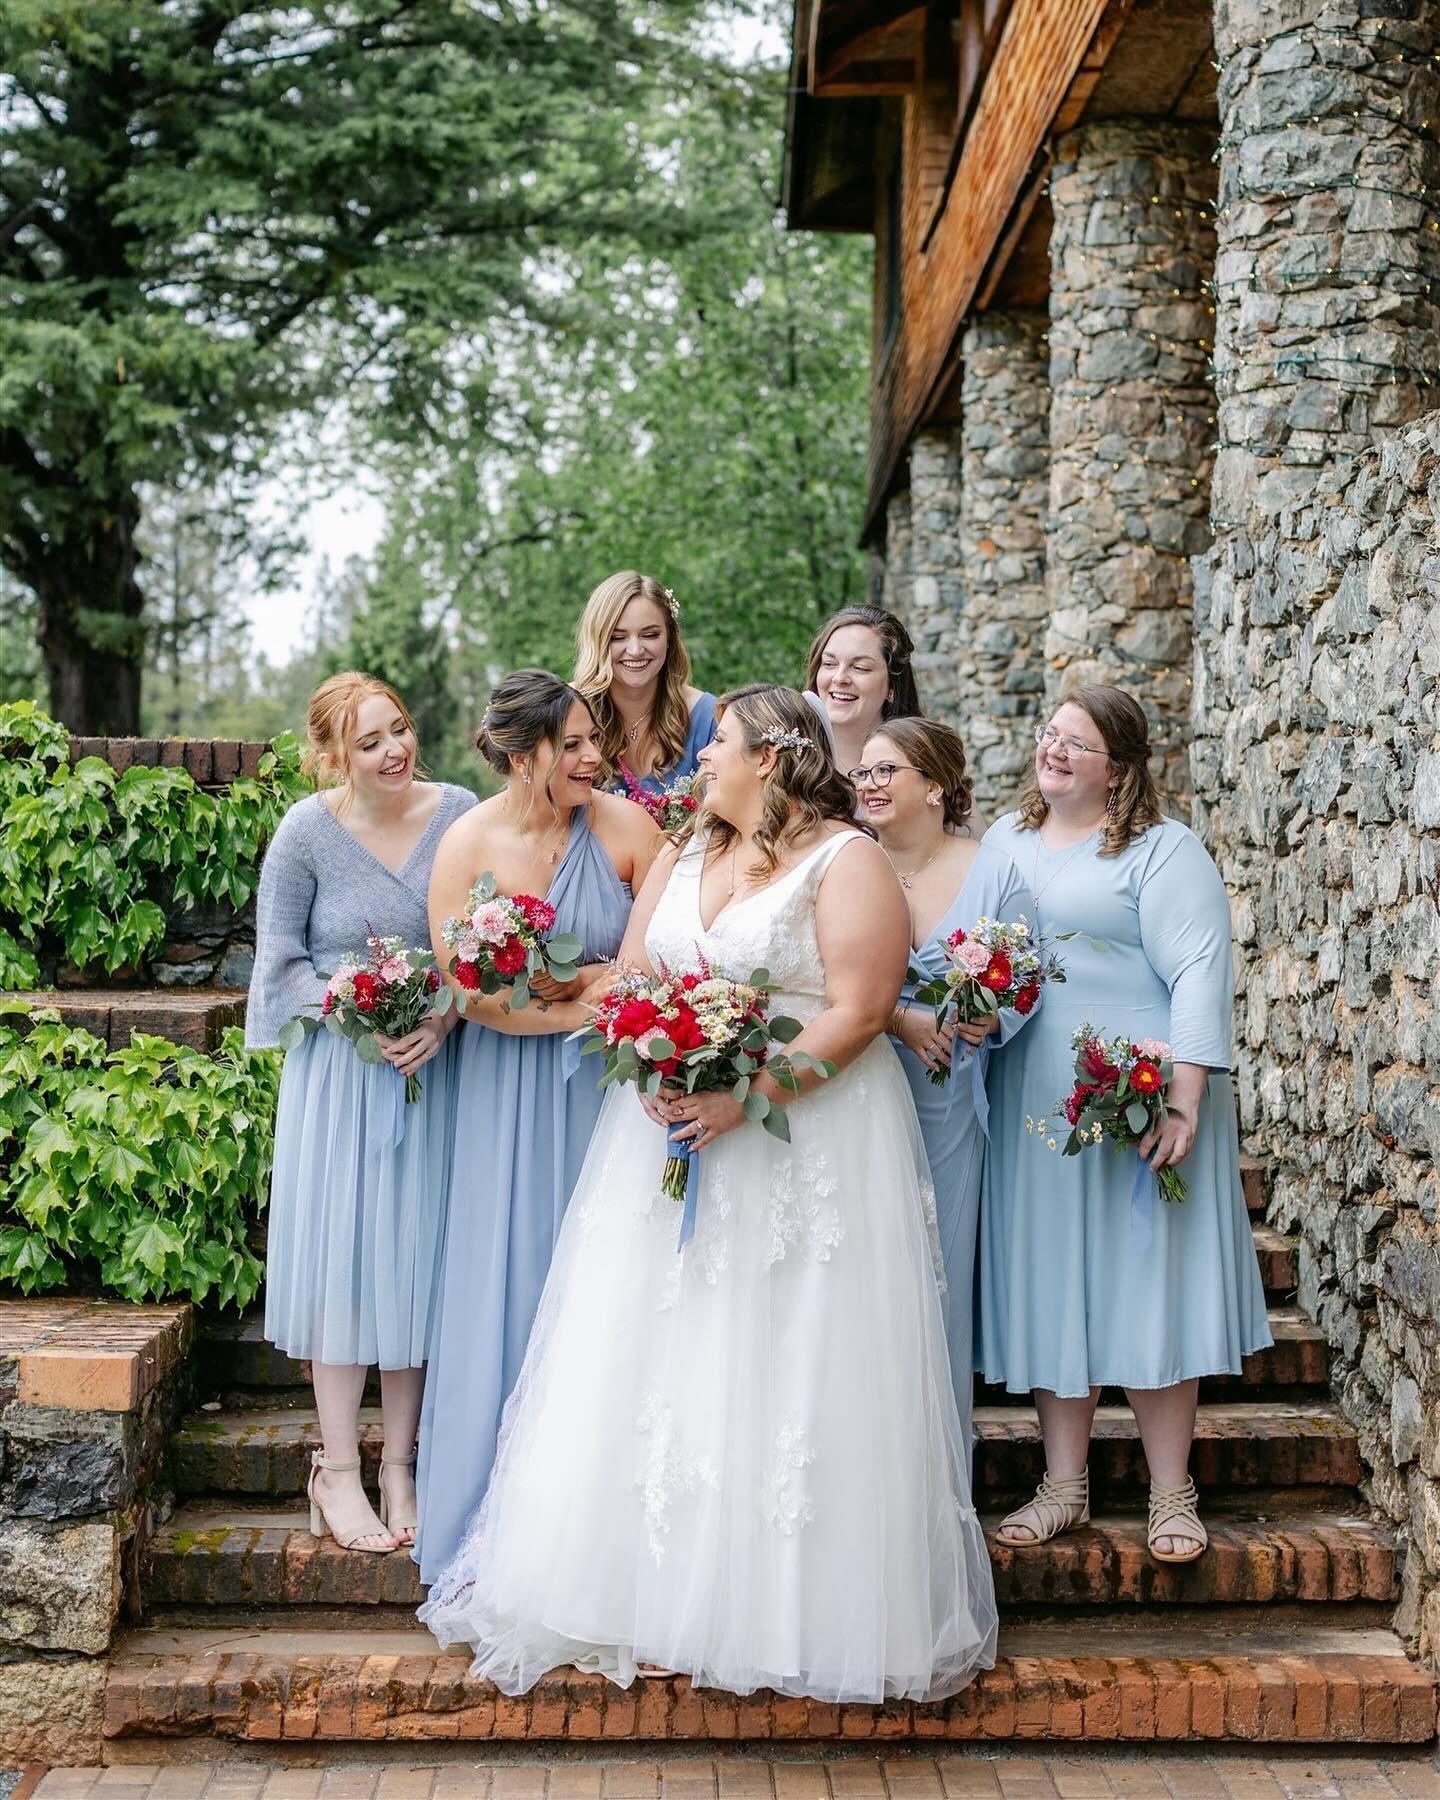 Holly &amp; Ryan had a big wedding party that brought the fun throughout the rainy day ❤️

Venue: @thenorthstarhouse
Coordinator: @bekahgsmith
Officiant: @megra_meg
HMU: @alldolledup_norcal
Floral Design: @fonsecasflorals
DJ: @jdprodj
Catering: @luci